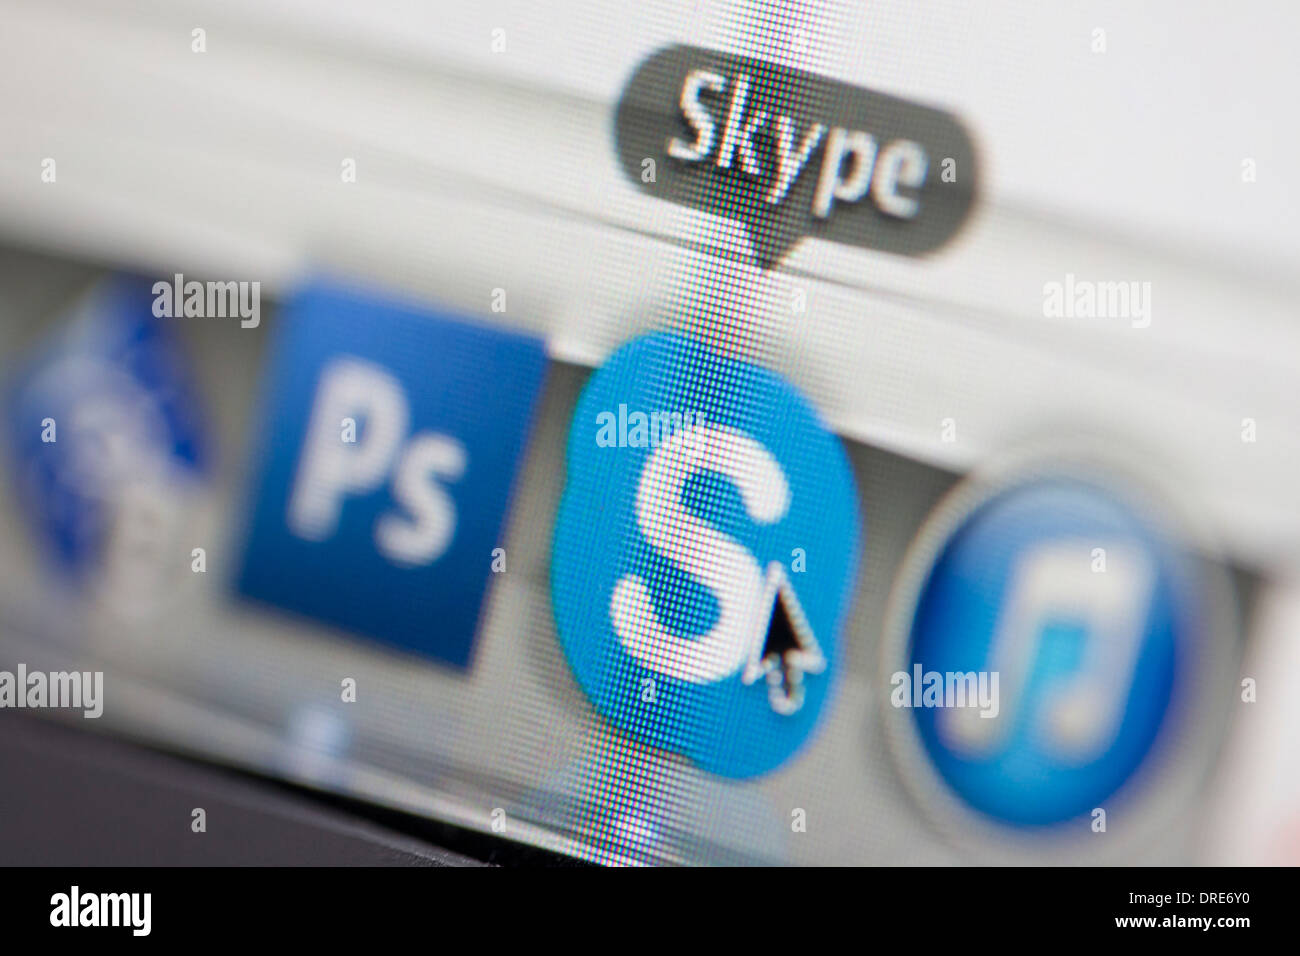 A detail from a Mac computer screen of the Skype icon in the dock. Stock Photo